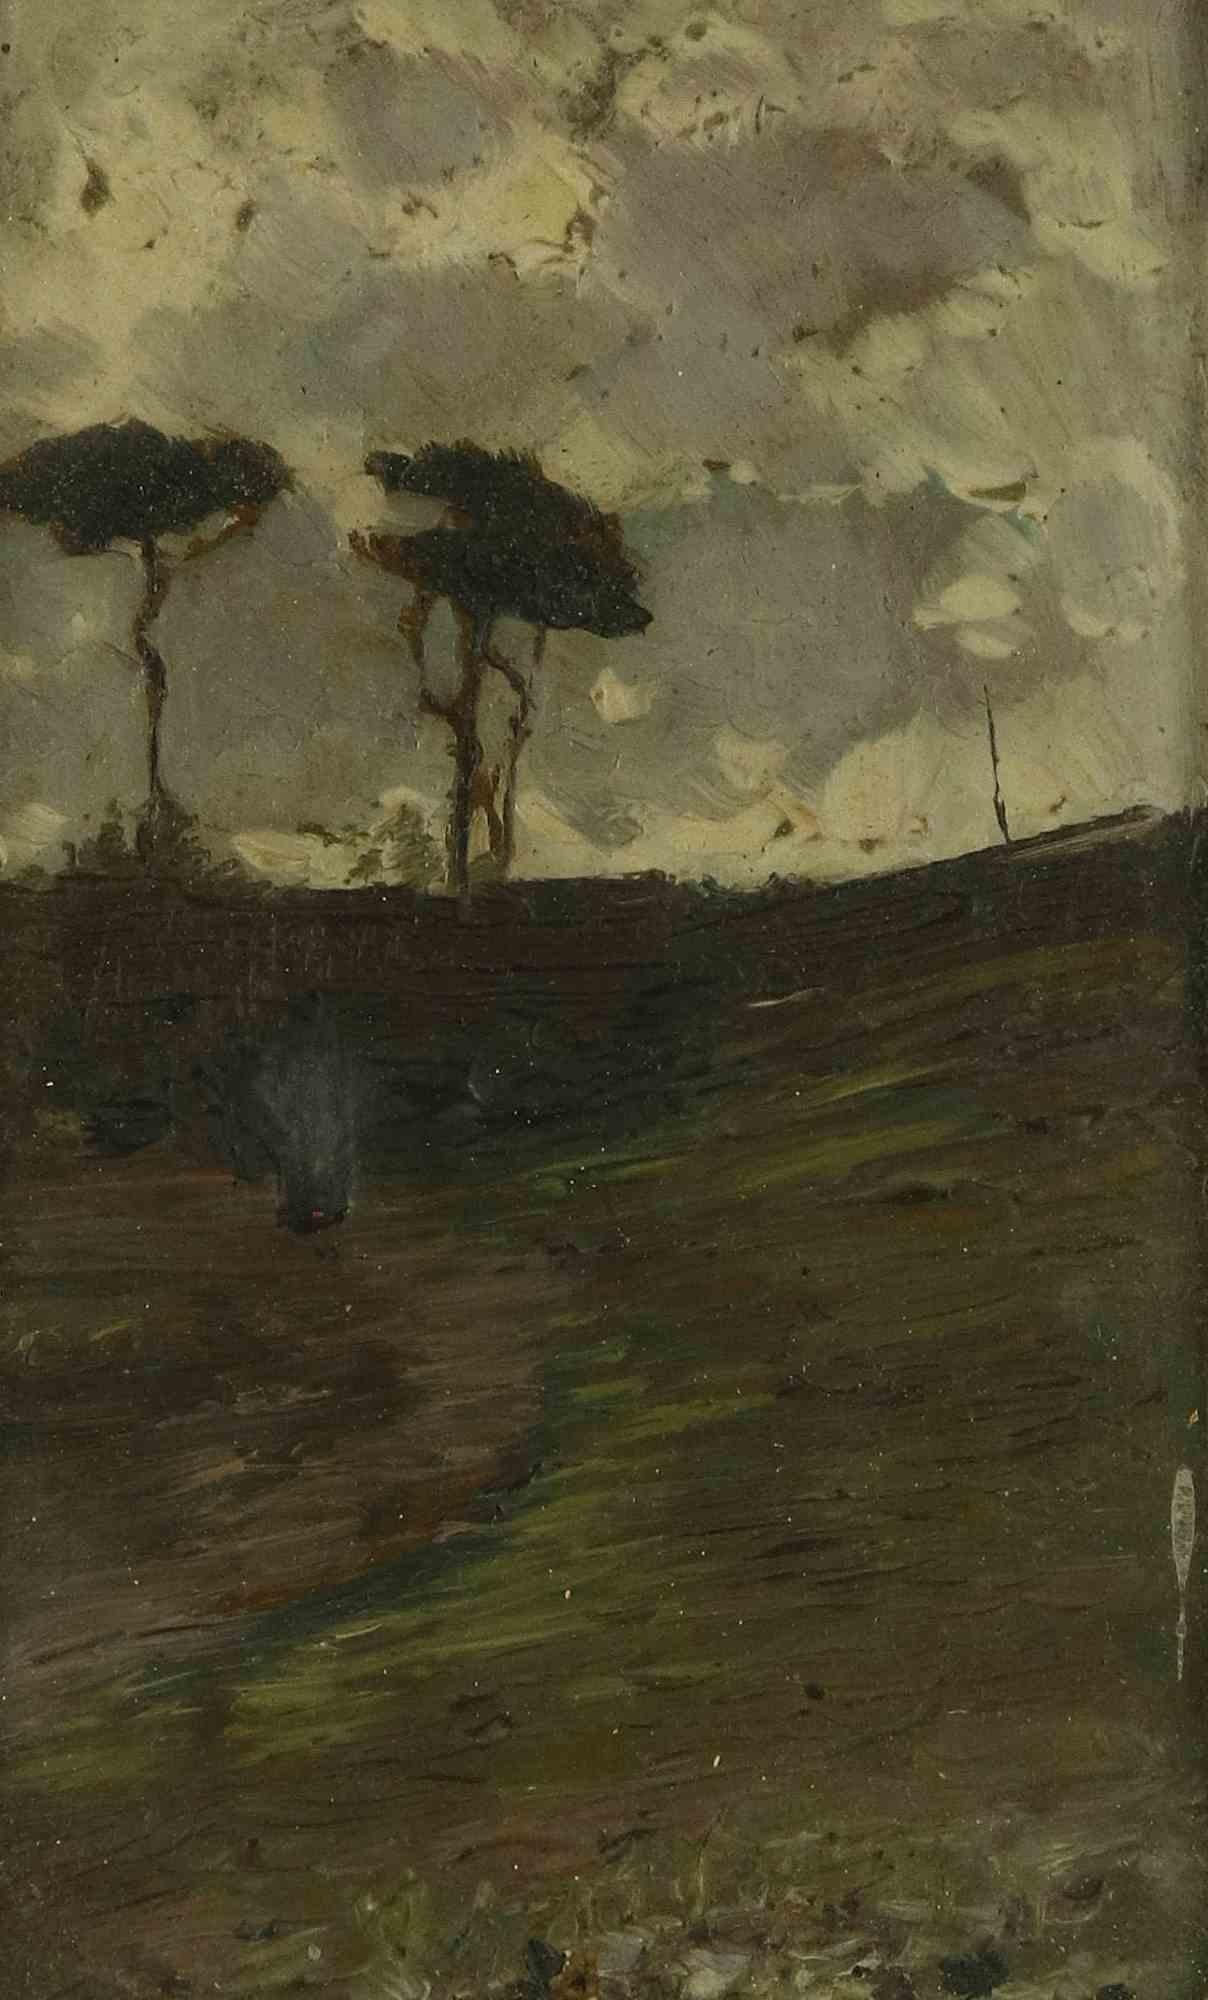 Landscape is an original modern artwork realized by Attilio Pratella in the early 20th Century.

Oil painting on board.

Includes frame.

Handwritten notes on the back

Good conditions